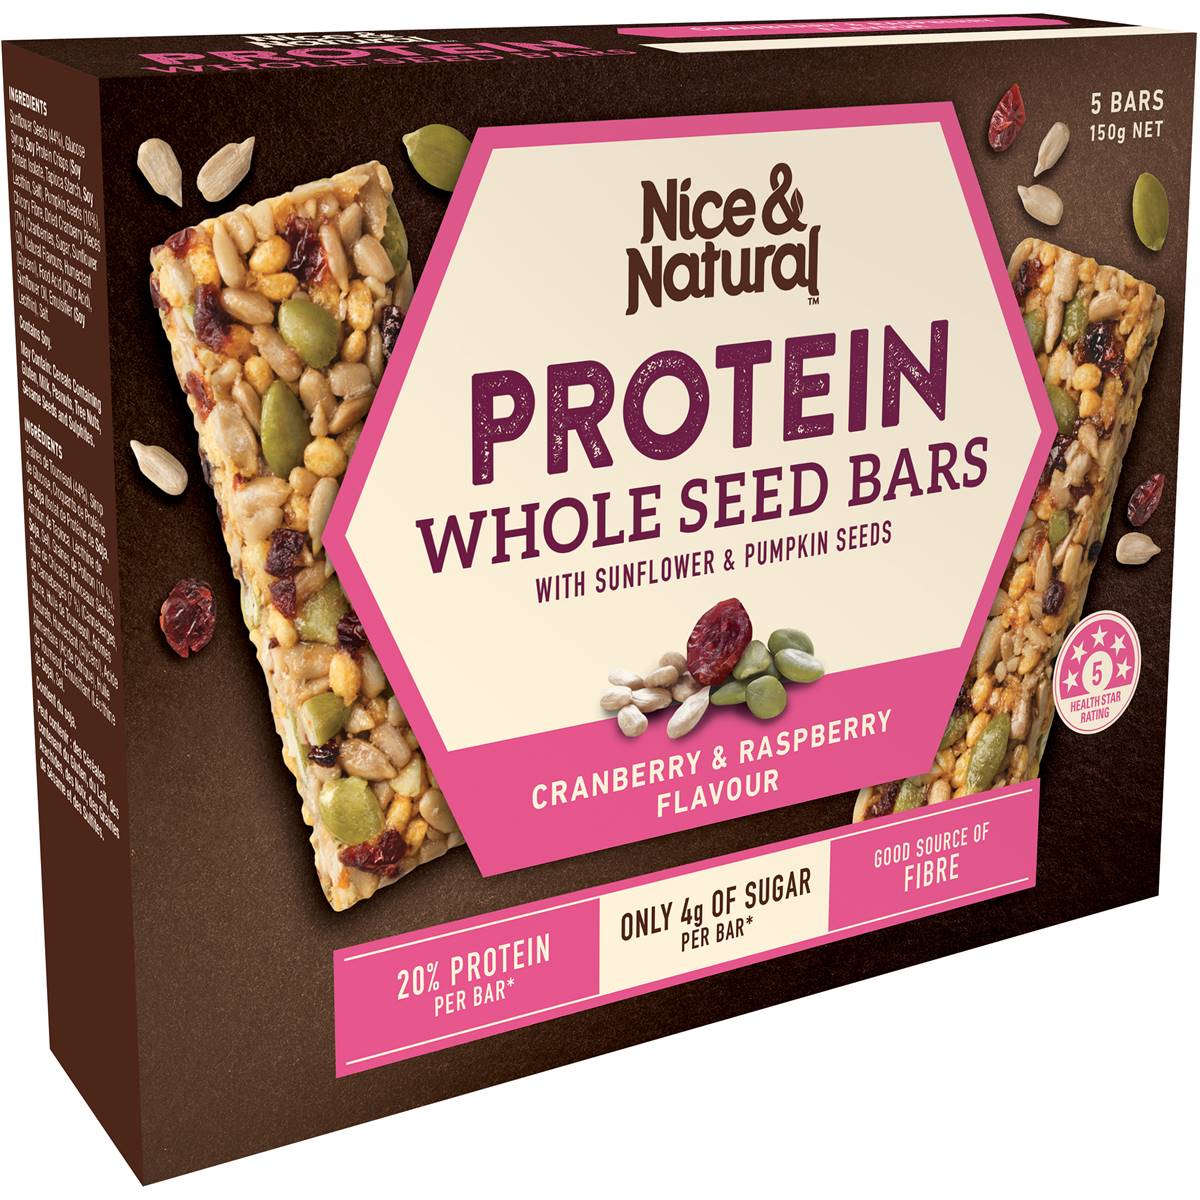 Nice & Natural Protein Wholeseed Bars Cranberry & Raspberry 5x30g